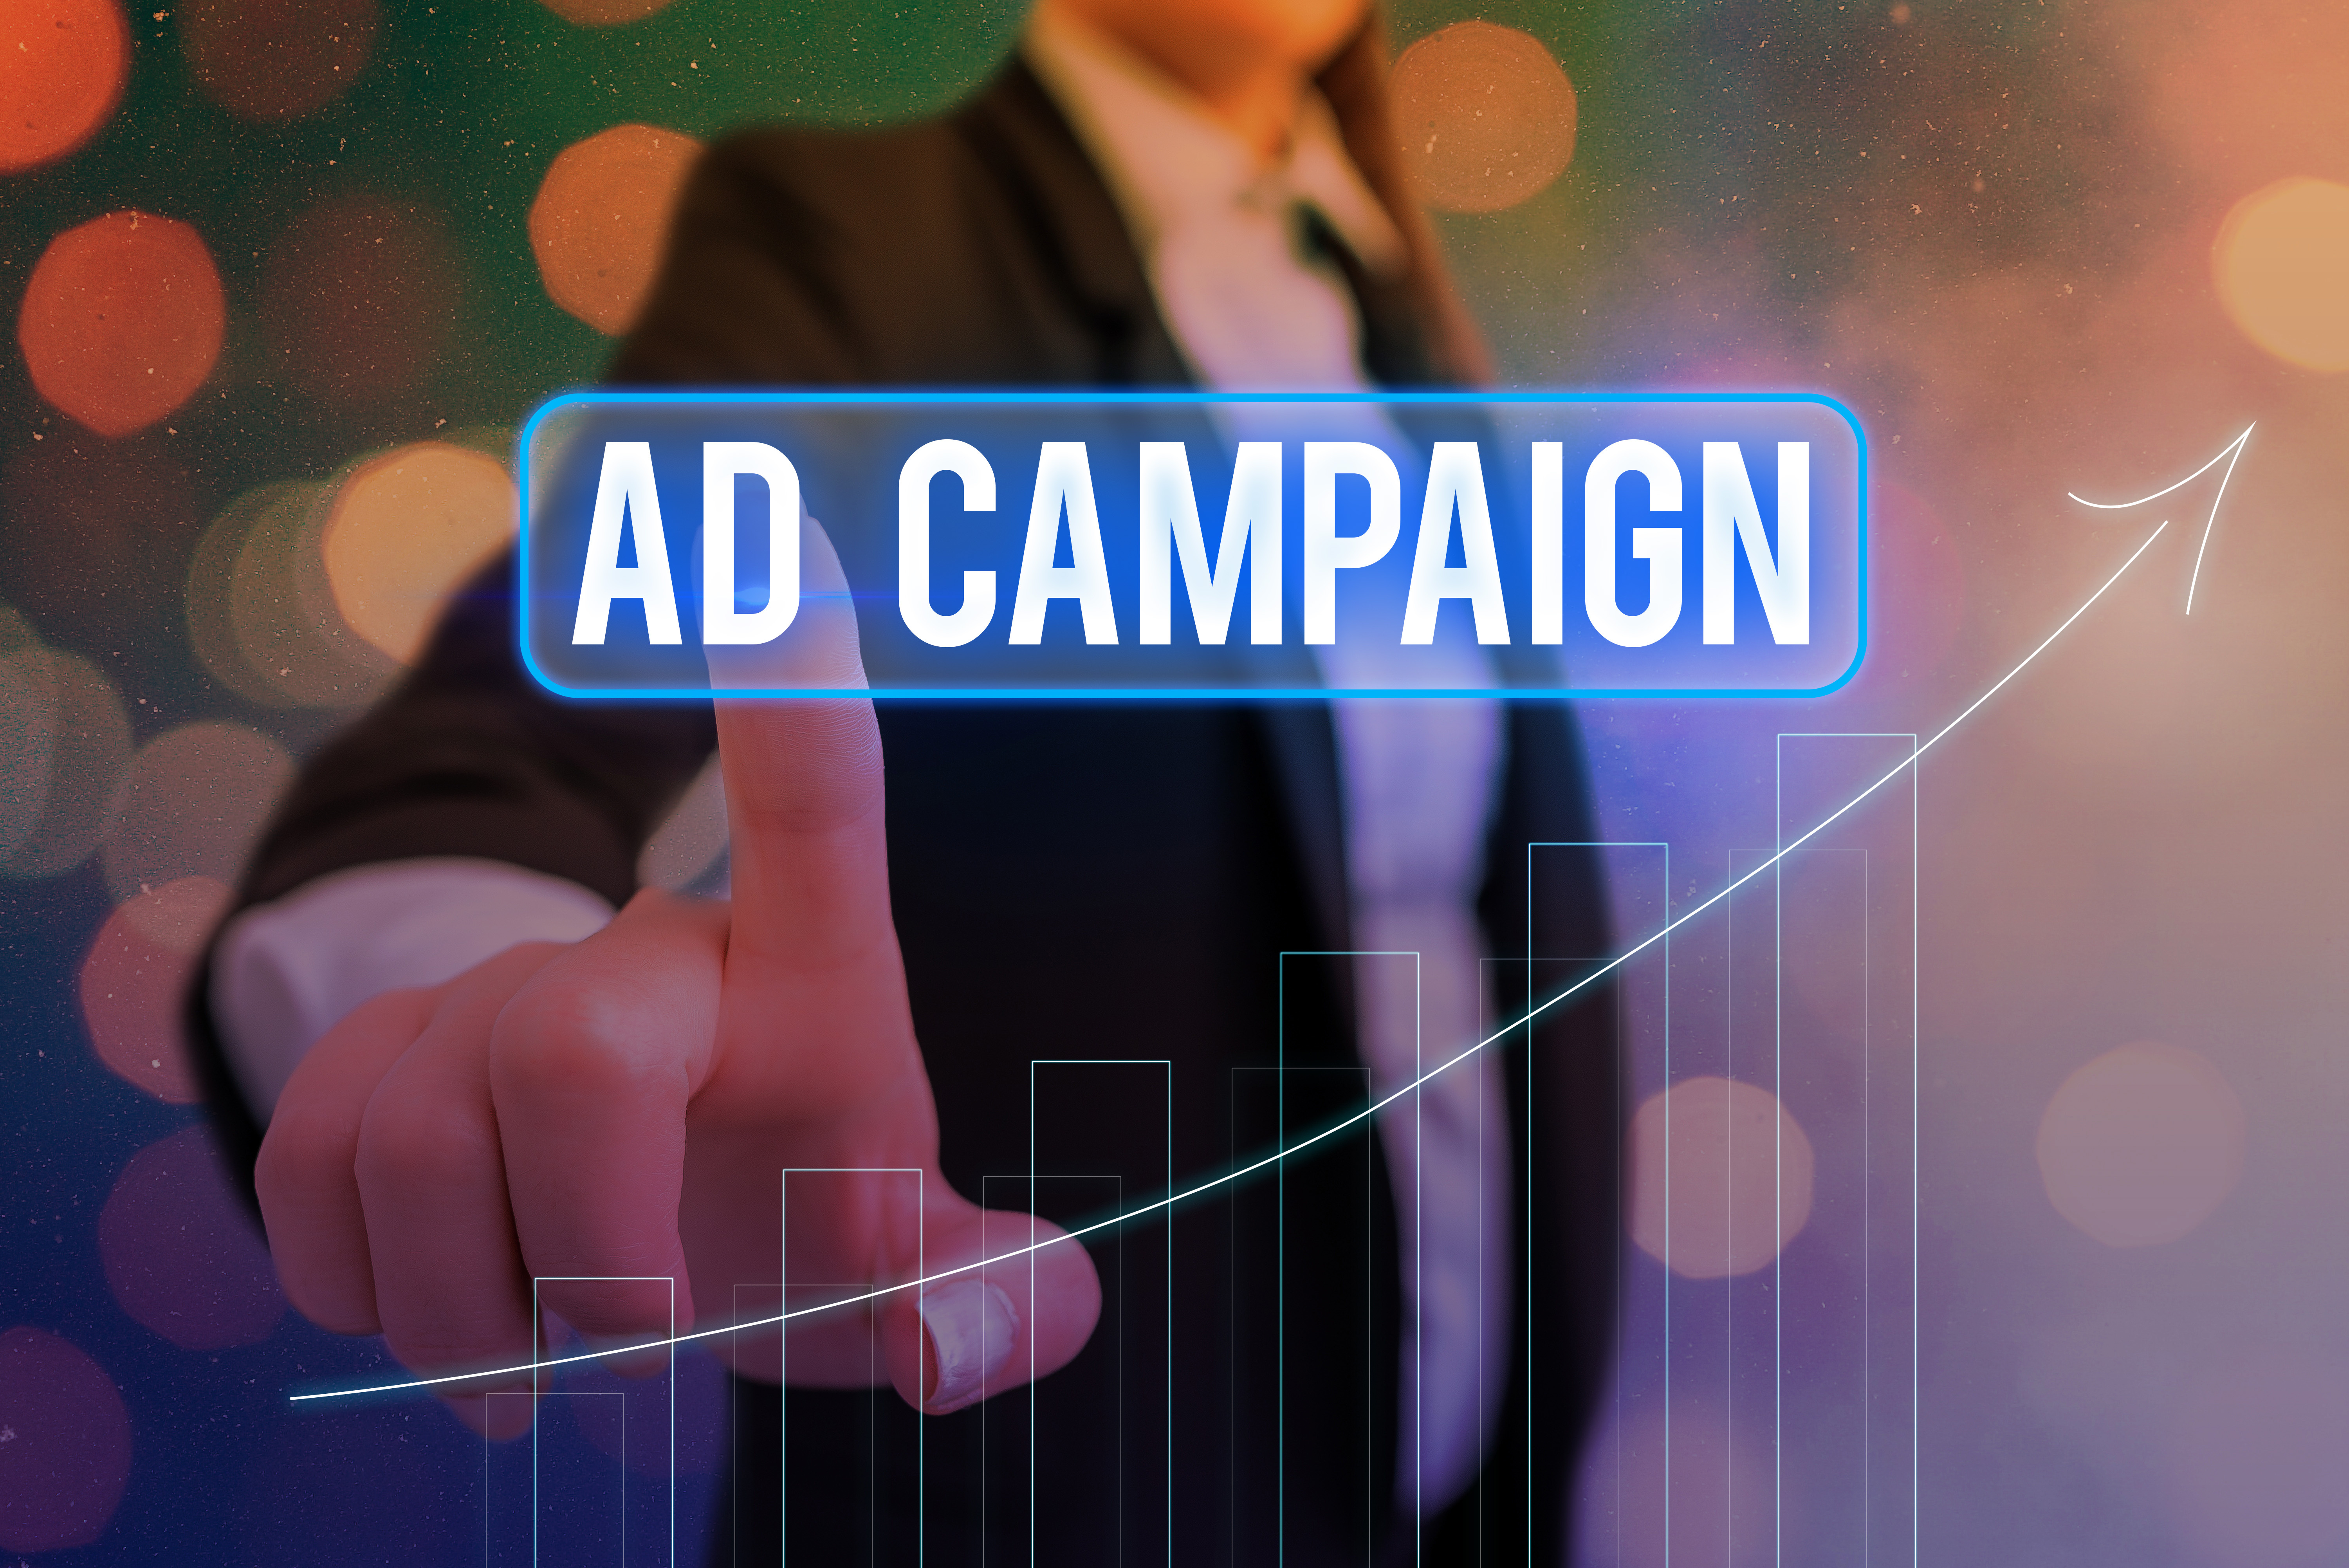 Ad Campaigns with a bar chart showing up to the right